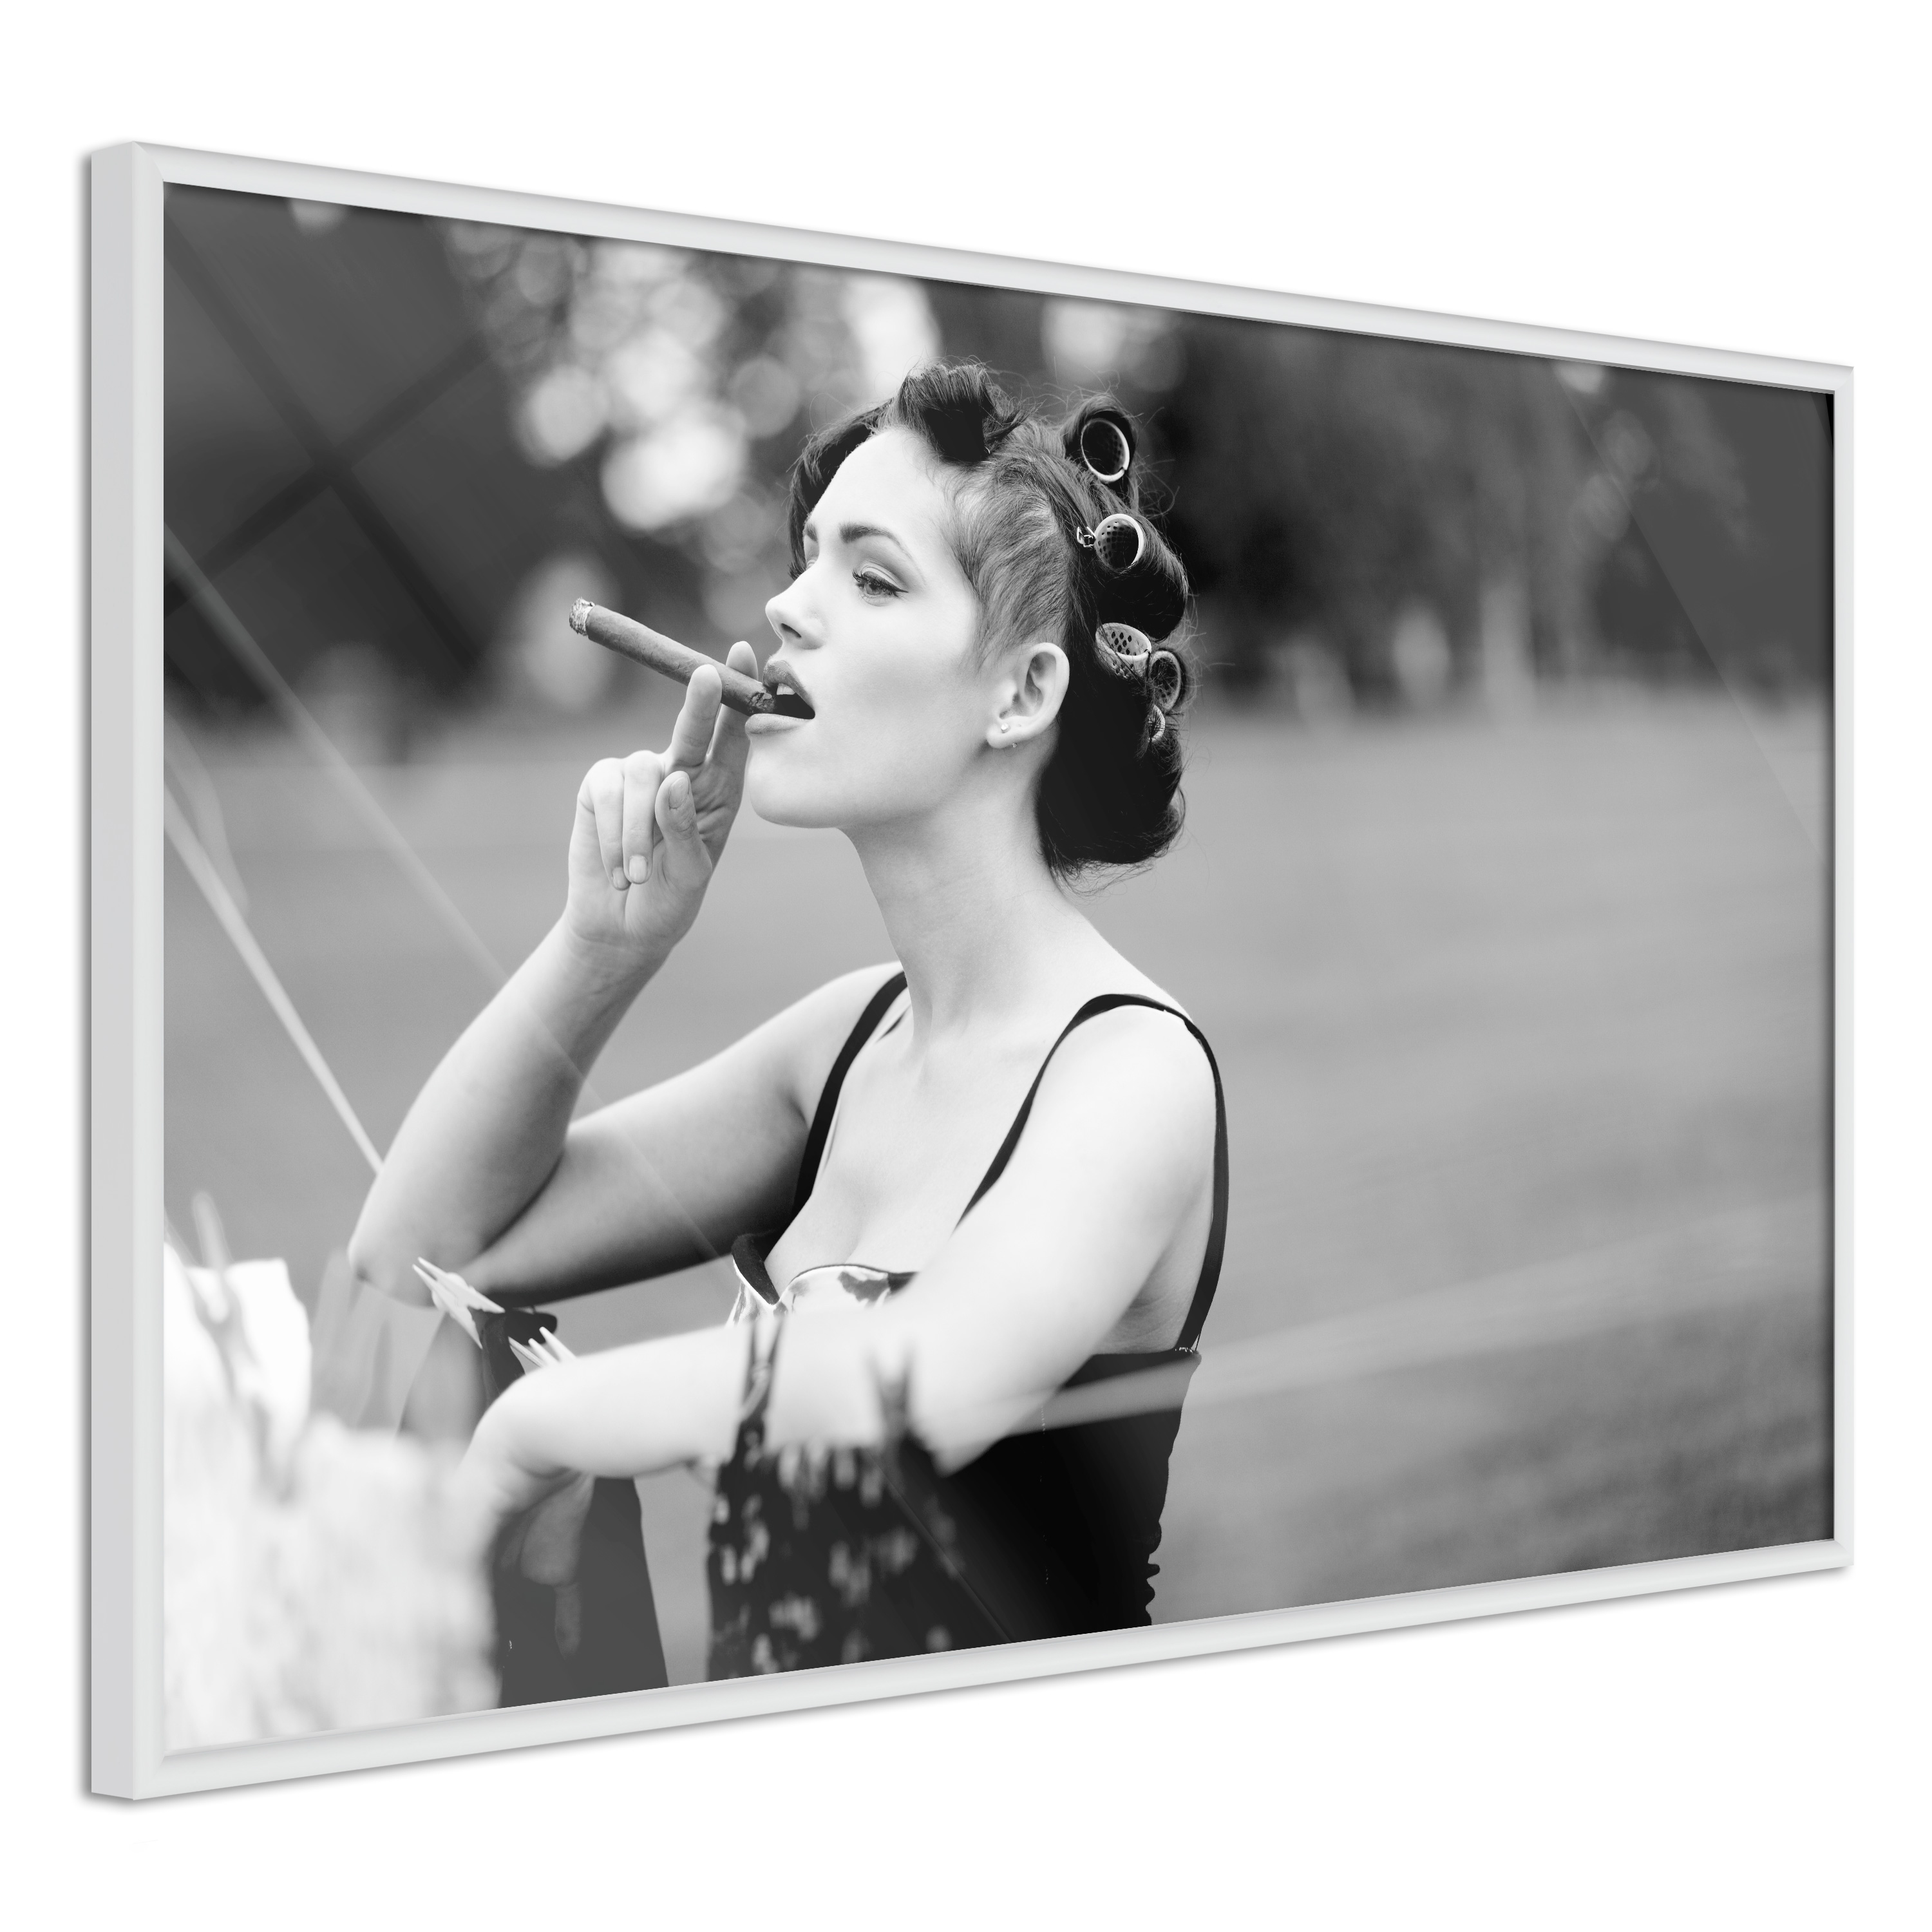 Poster - Smoking Harms Your Health - 30x20